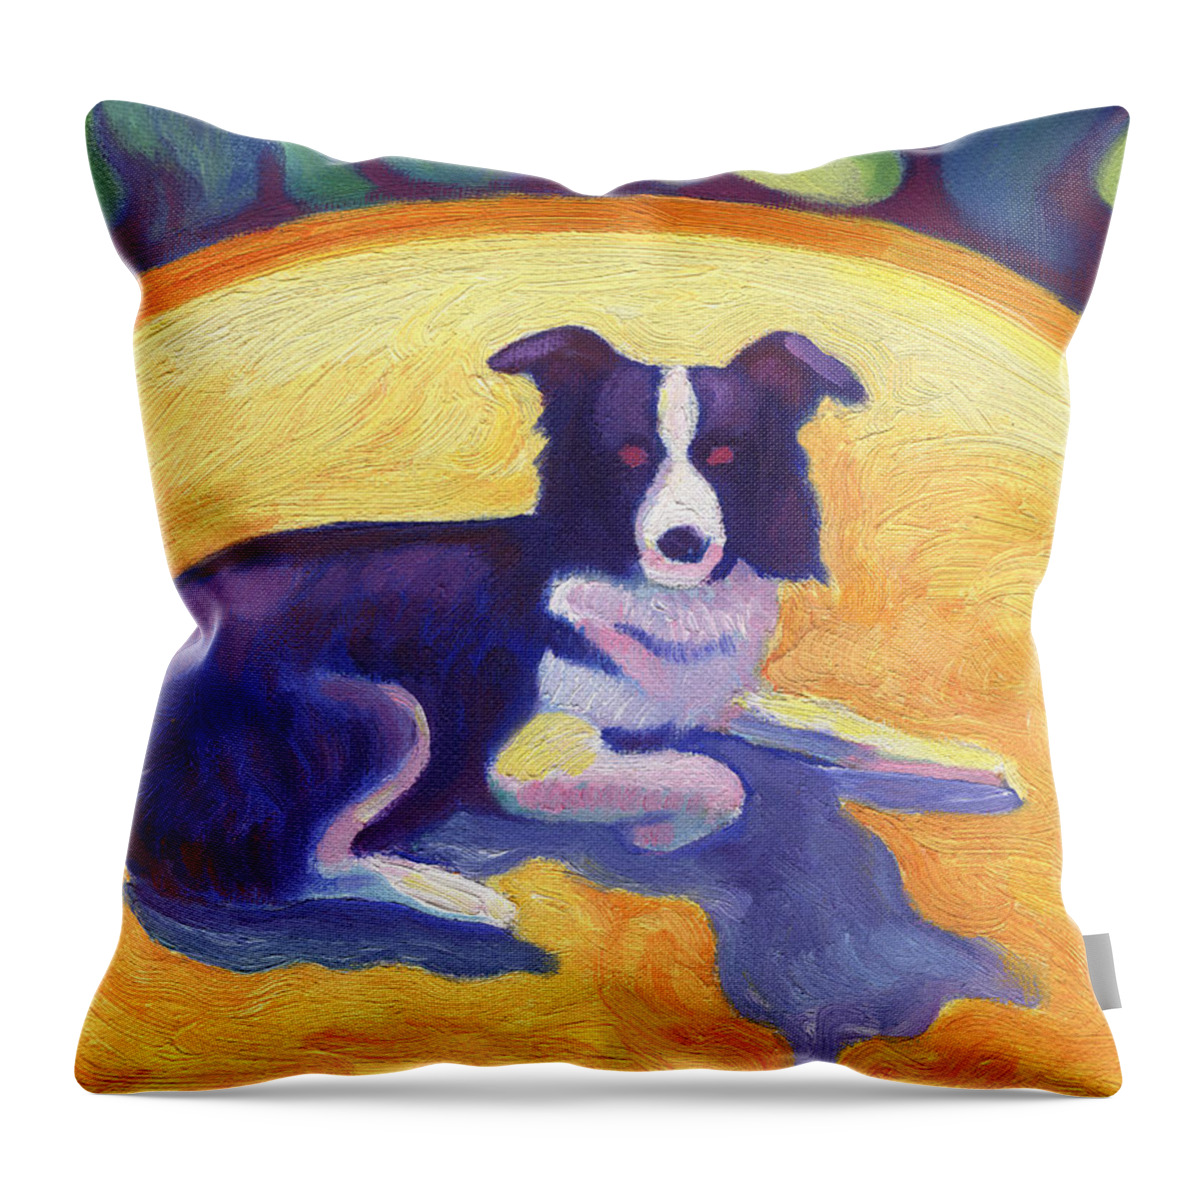 Ten Throw Pillow featuring the painting Border Collie by Linda Ruiz-Lozito